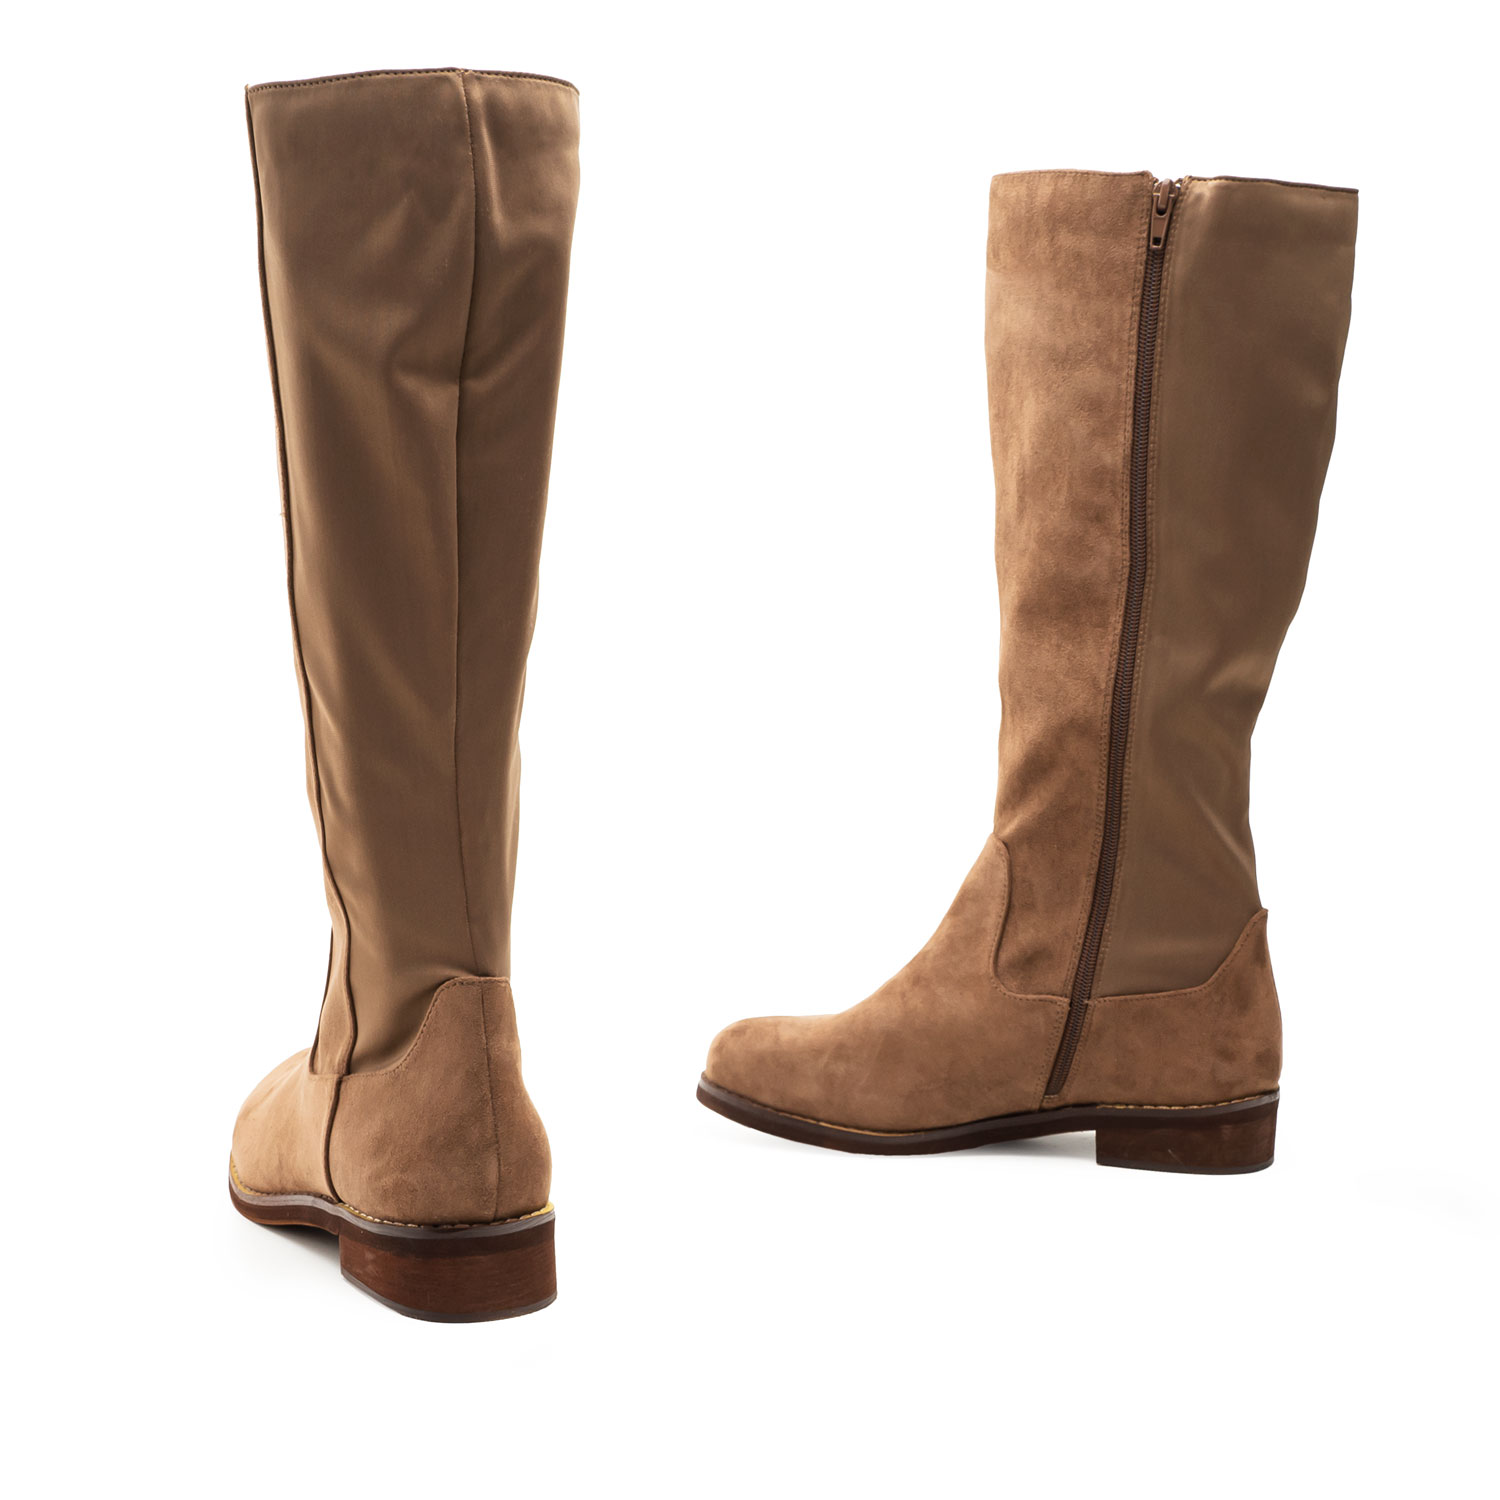 Low-Heeled Boots in Taupe Suedette 